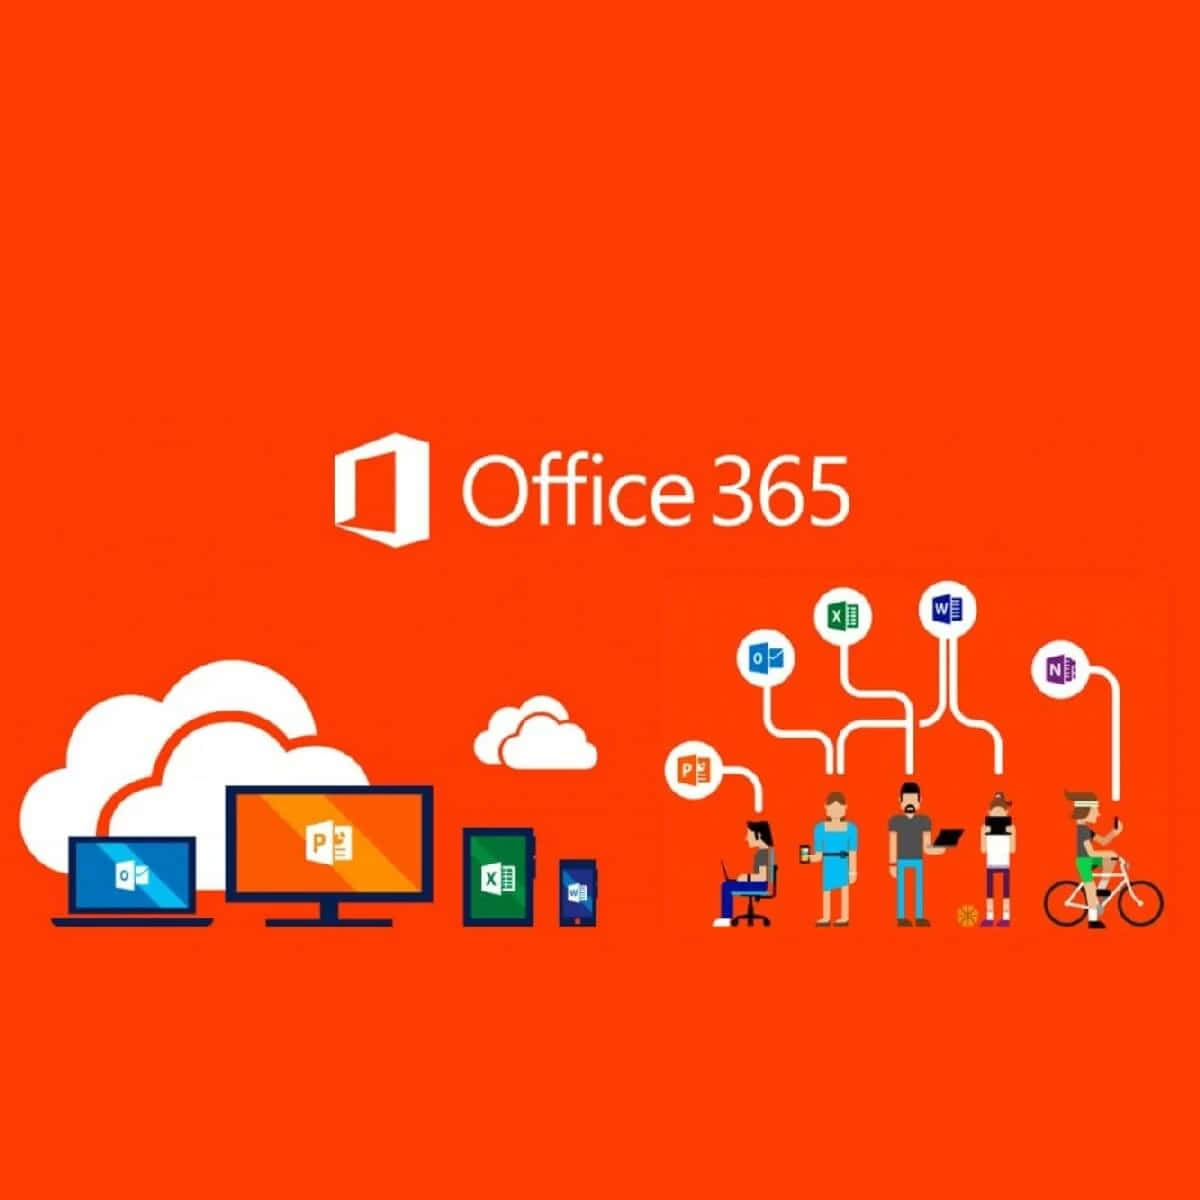 "Stay Organized with Office 365"